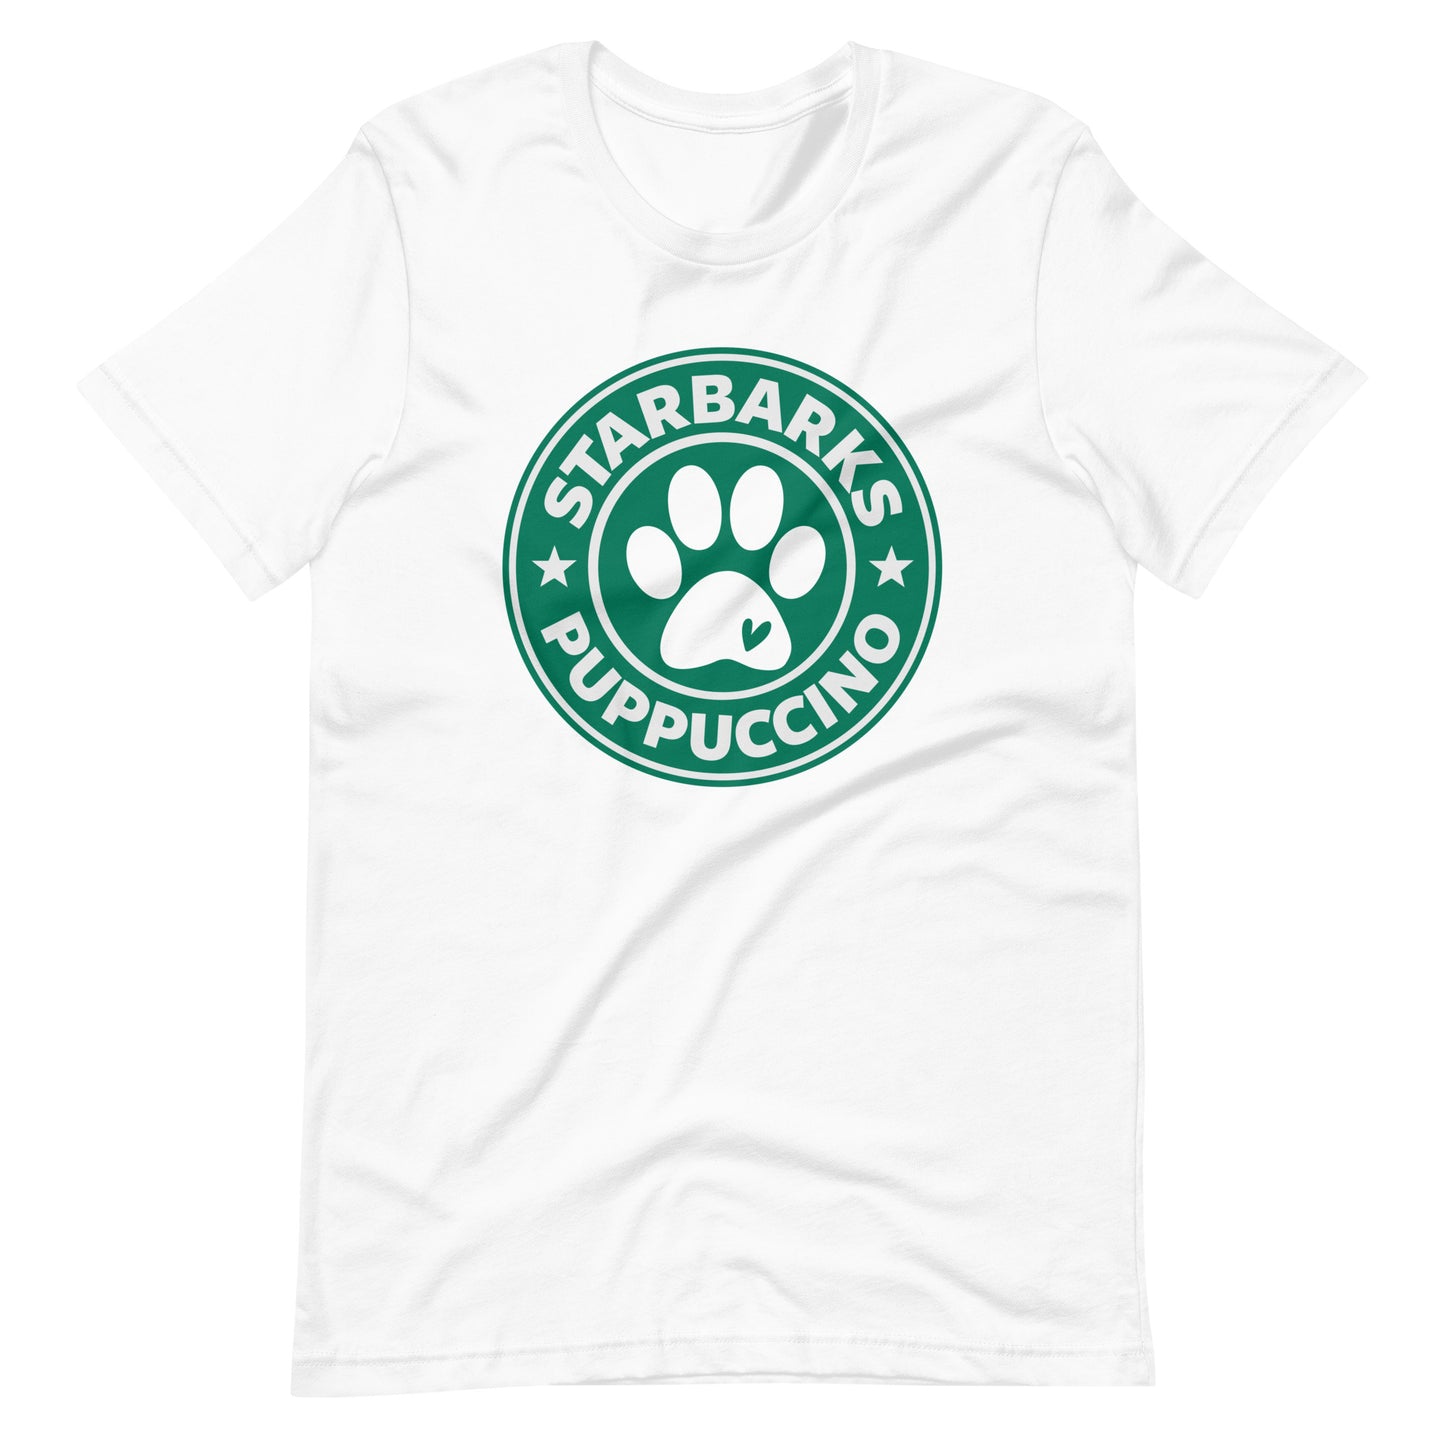 Starbarks Puppuccino Dog Lovers T-Shirt